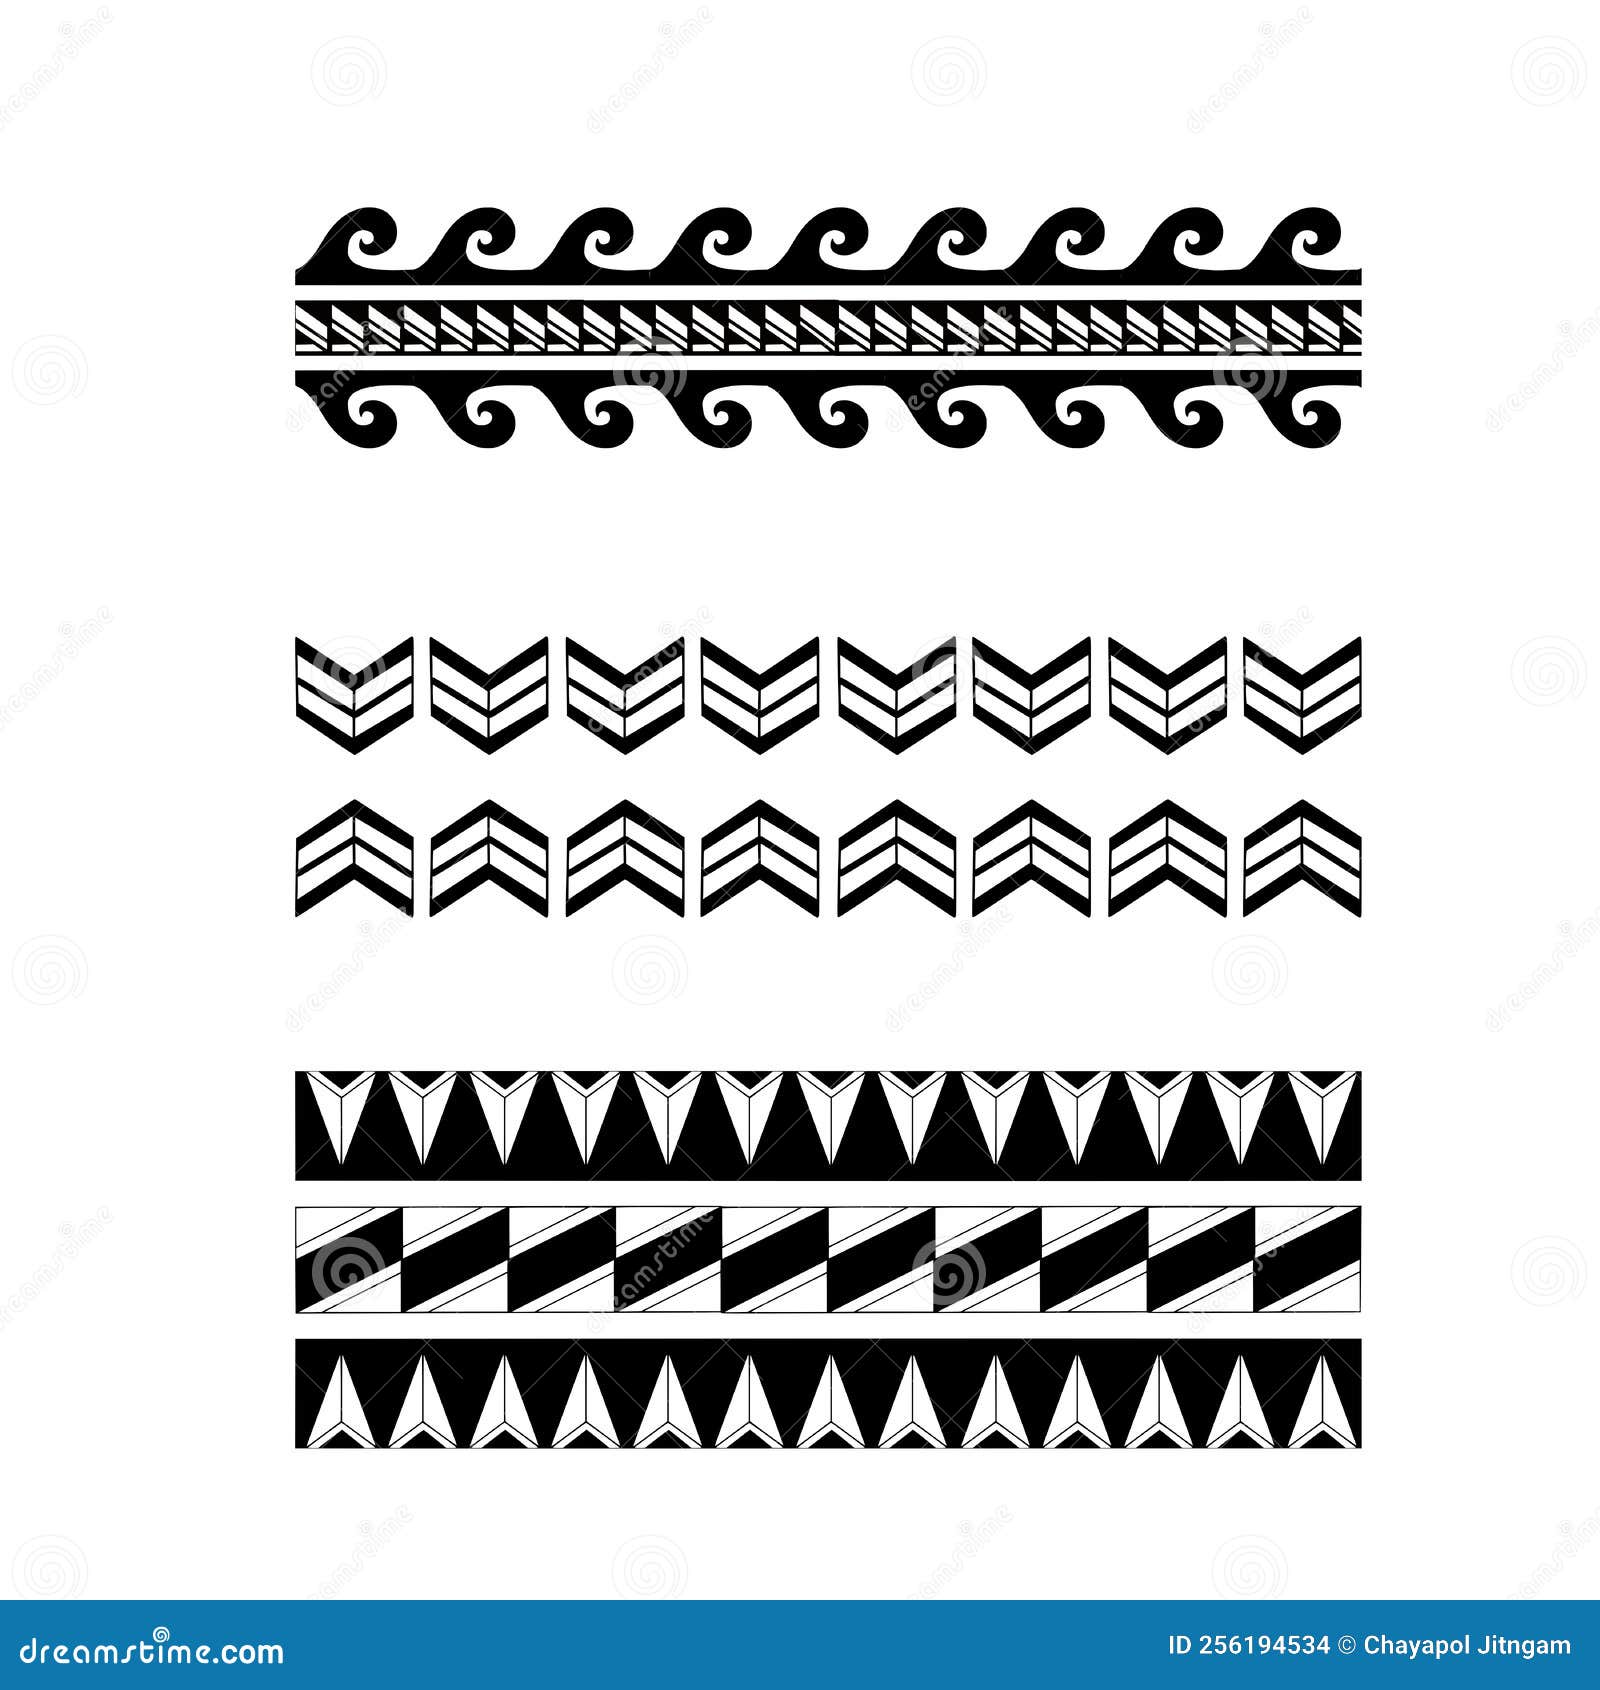 Polynesian Armband Tattoo Stencil. Pattern Samoan. Black and White Texture  Stock Vector - Illustration of print, graphic: 256194534